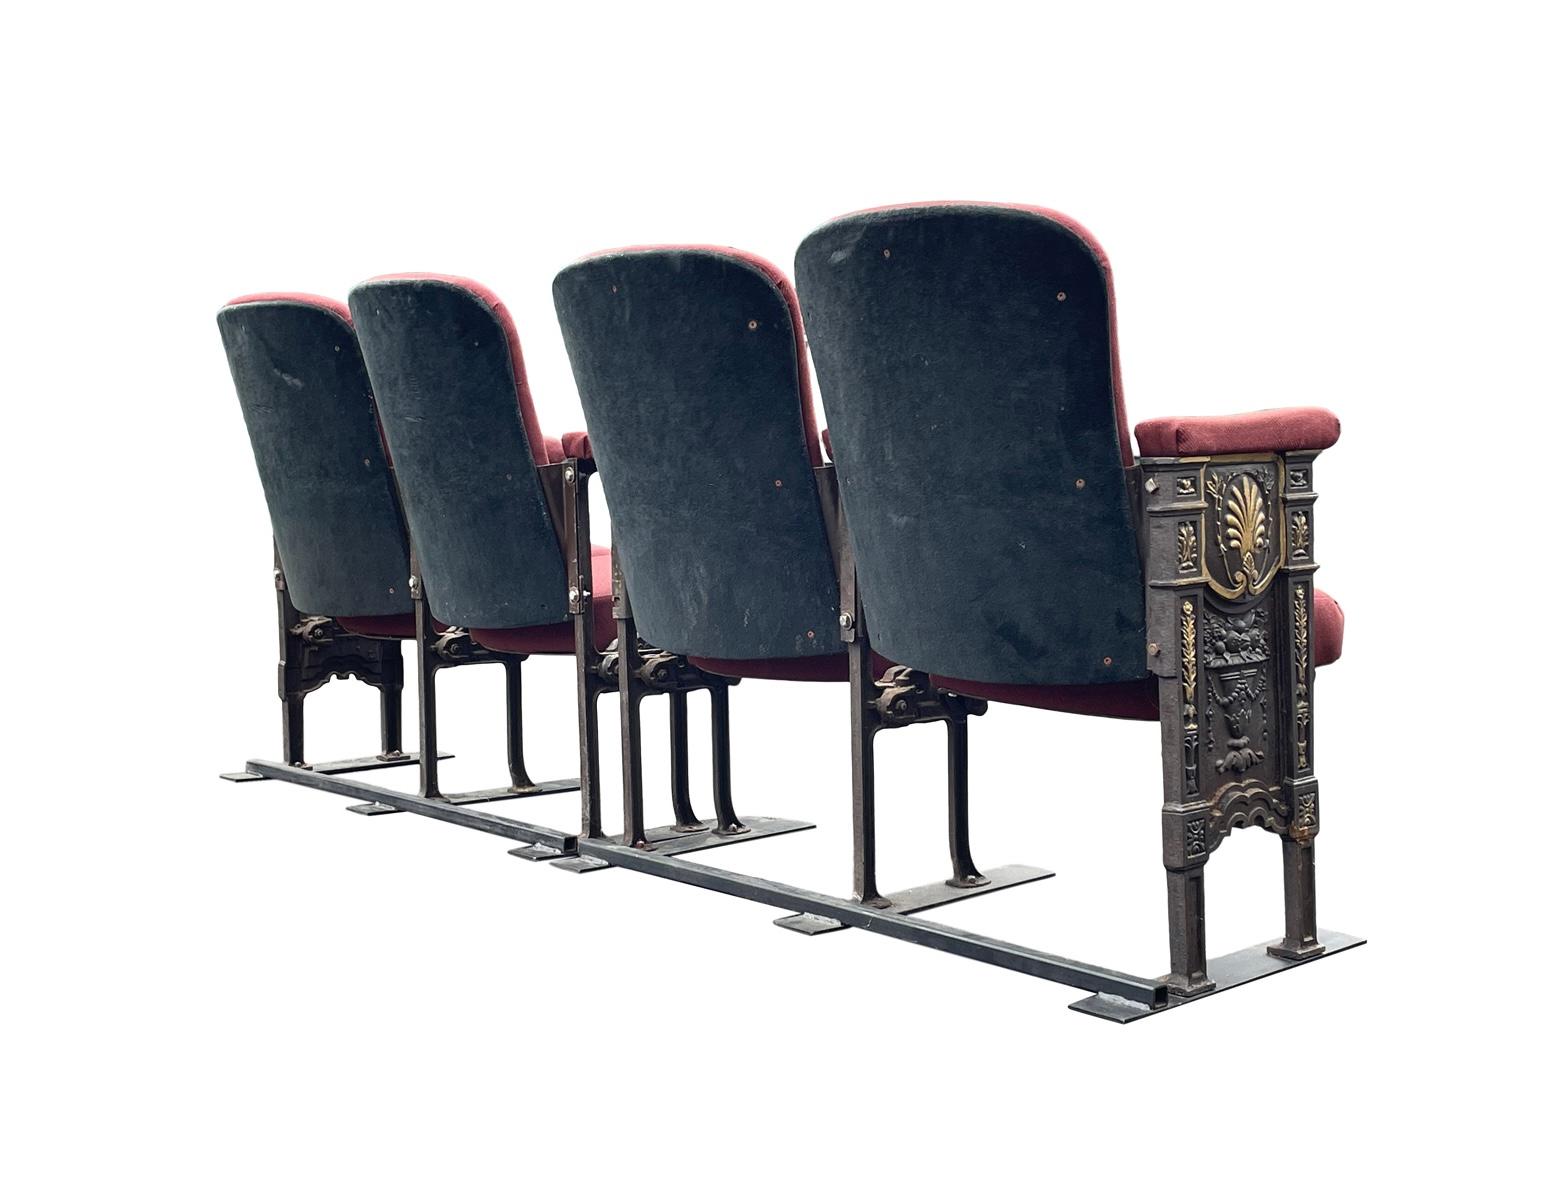 Original Studio54 Newyork Art Deco Theater Seat Bench Chairs In Fair Condition For Sale In Bensalem, PA